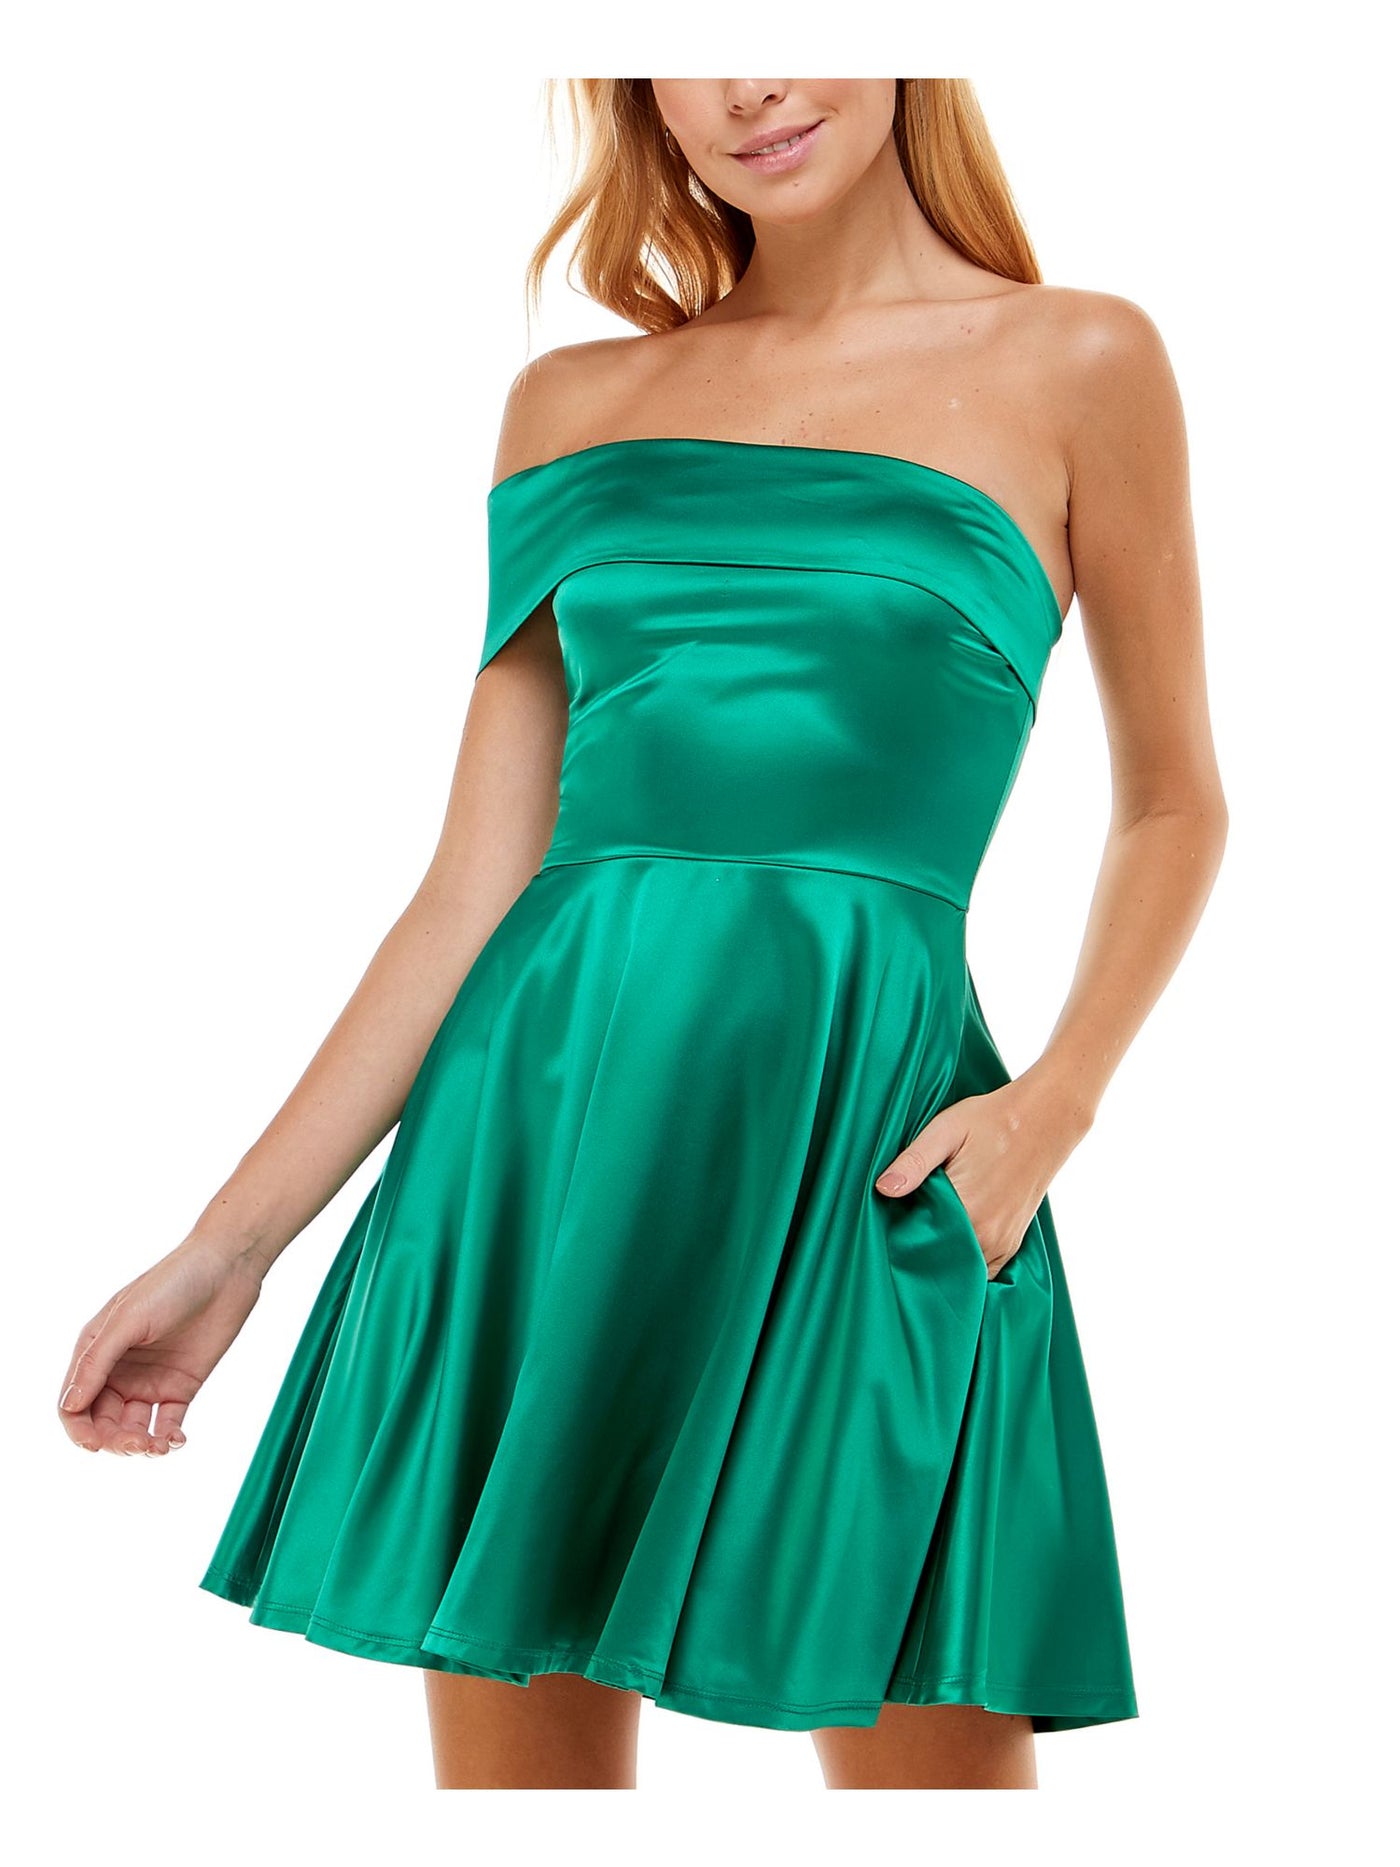 CITY STUDIO Womens Green Stretch Zippered Darted One Shoulder Sleeveless Off Shoulder Short Party Fit + Flare Dress Juniors 13